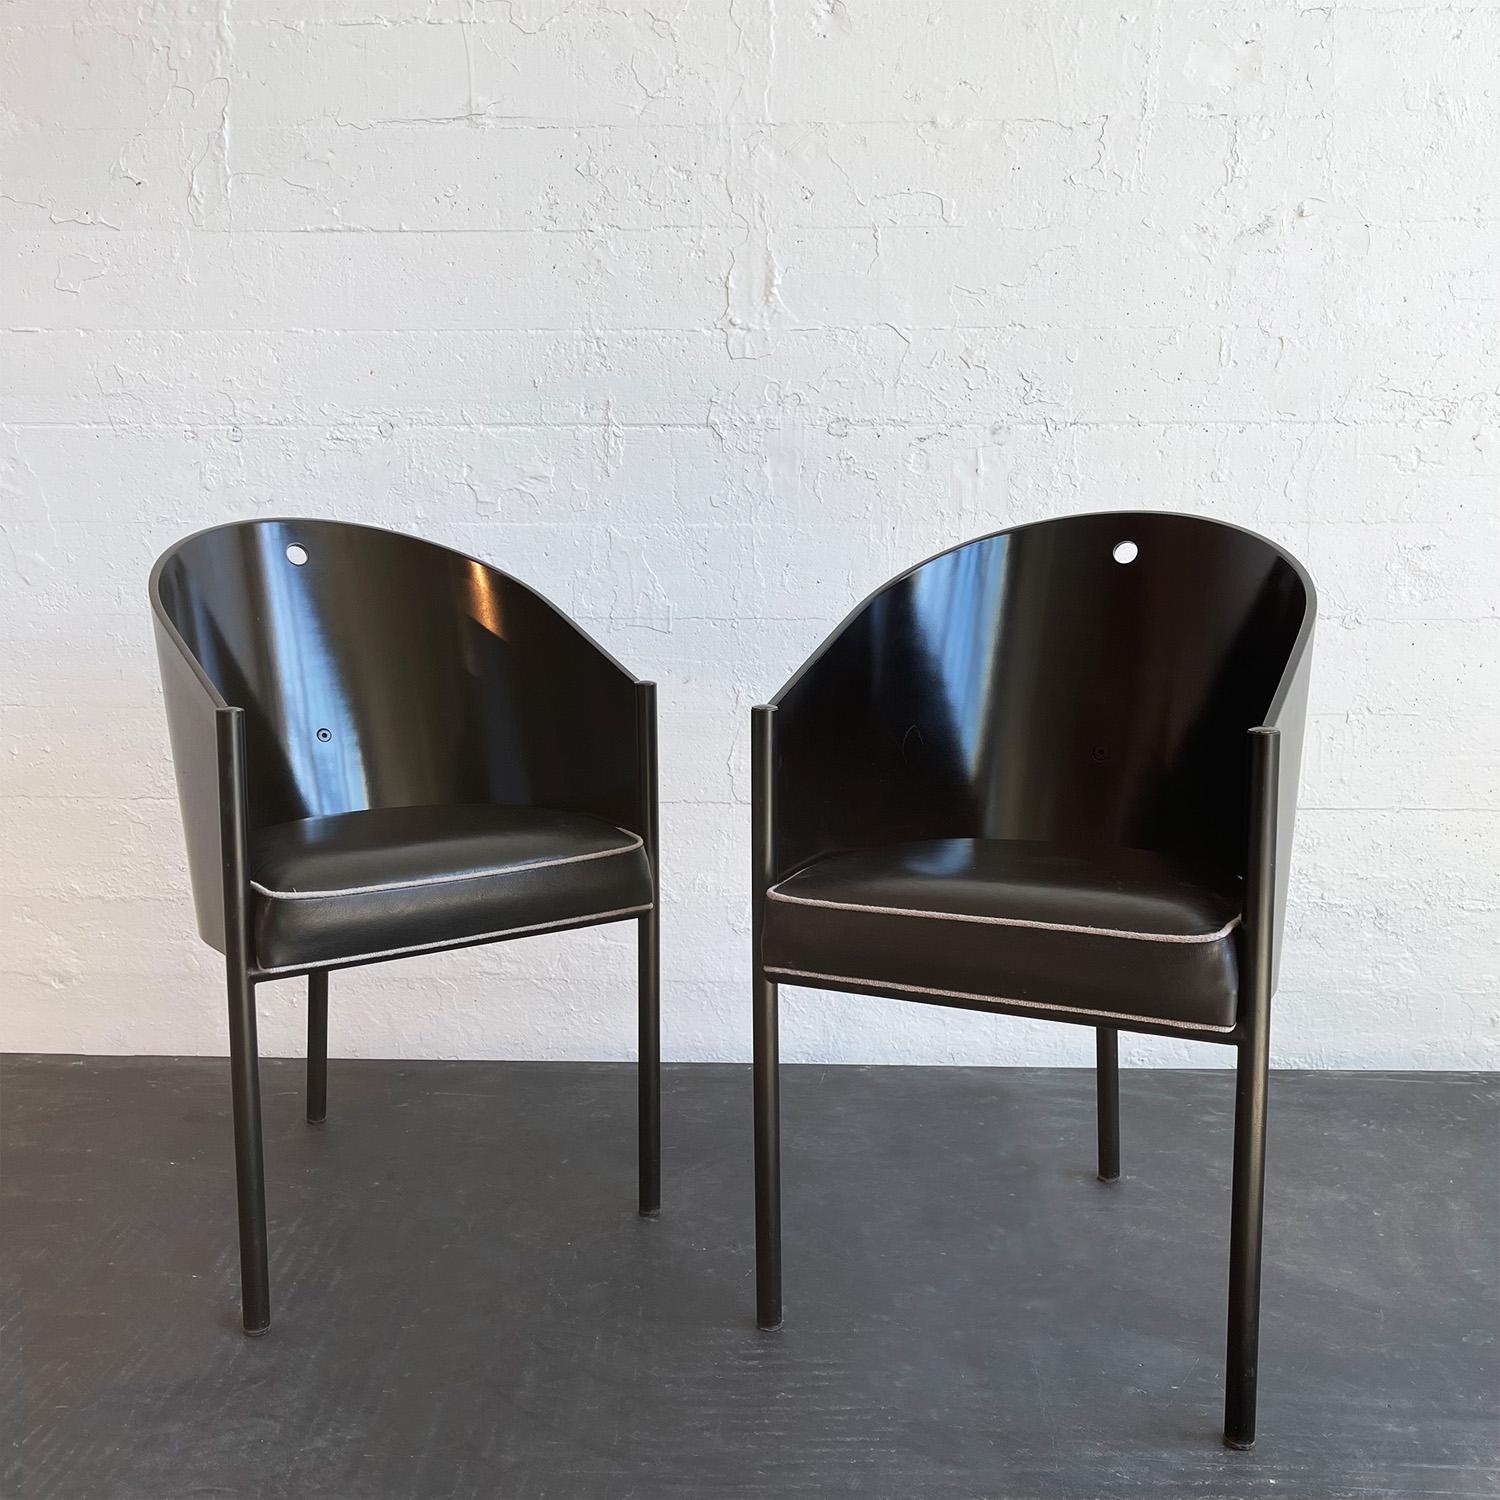 This pair of sleek, Costes chairs by French designer and architect Philippe Starck for Driade, Italy was designed for the Costes Cafe in Paris. The chair's barrel shell is made of black lacquered plywood that rests on three black-painted, tubular,